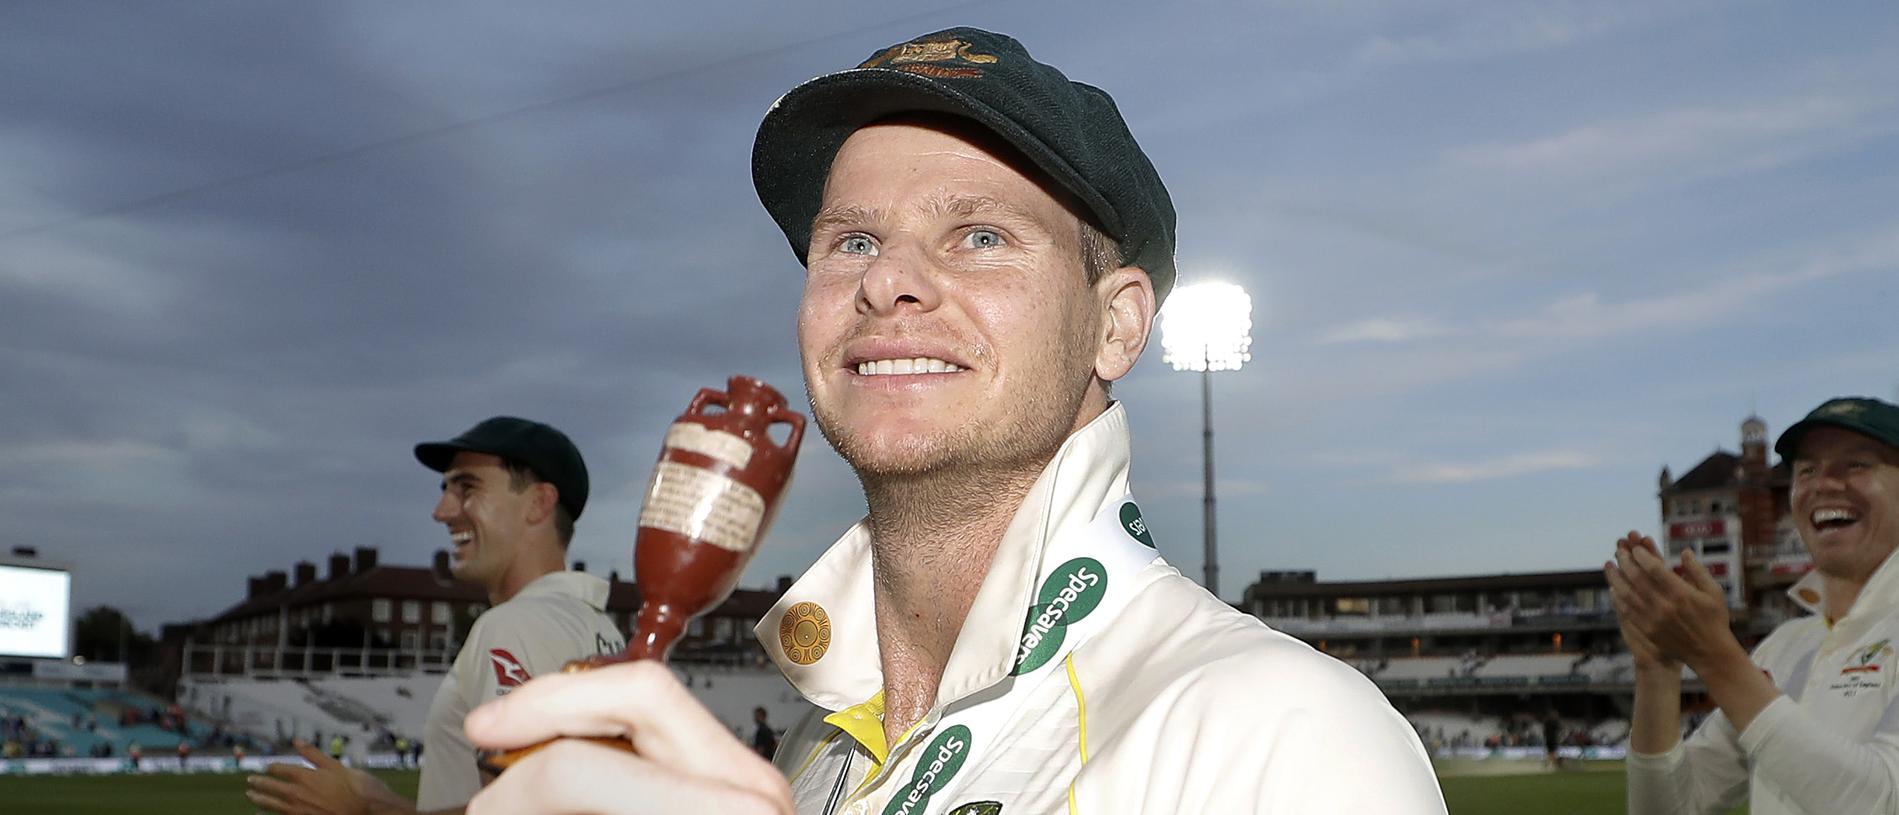 Steve Smith in talks to play for Sussex during buildup to Ashes